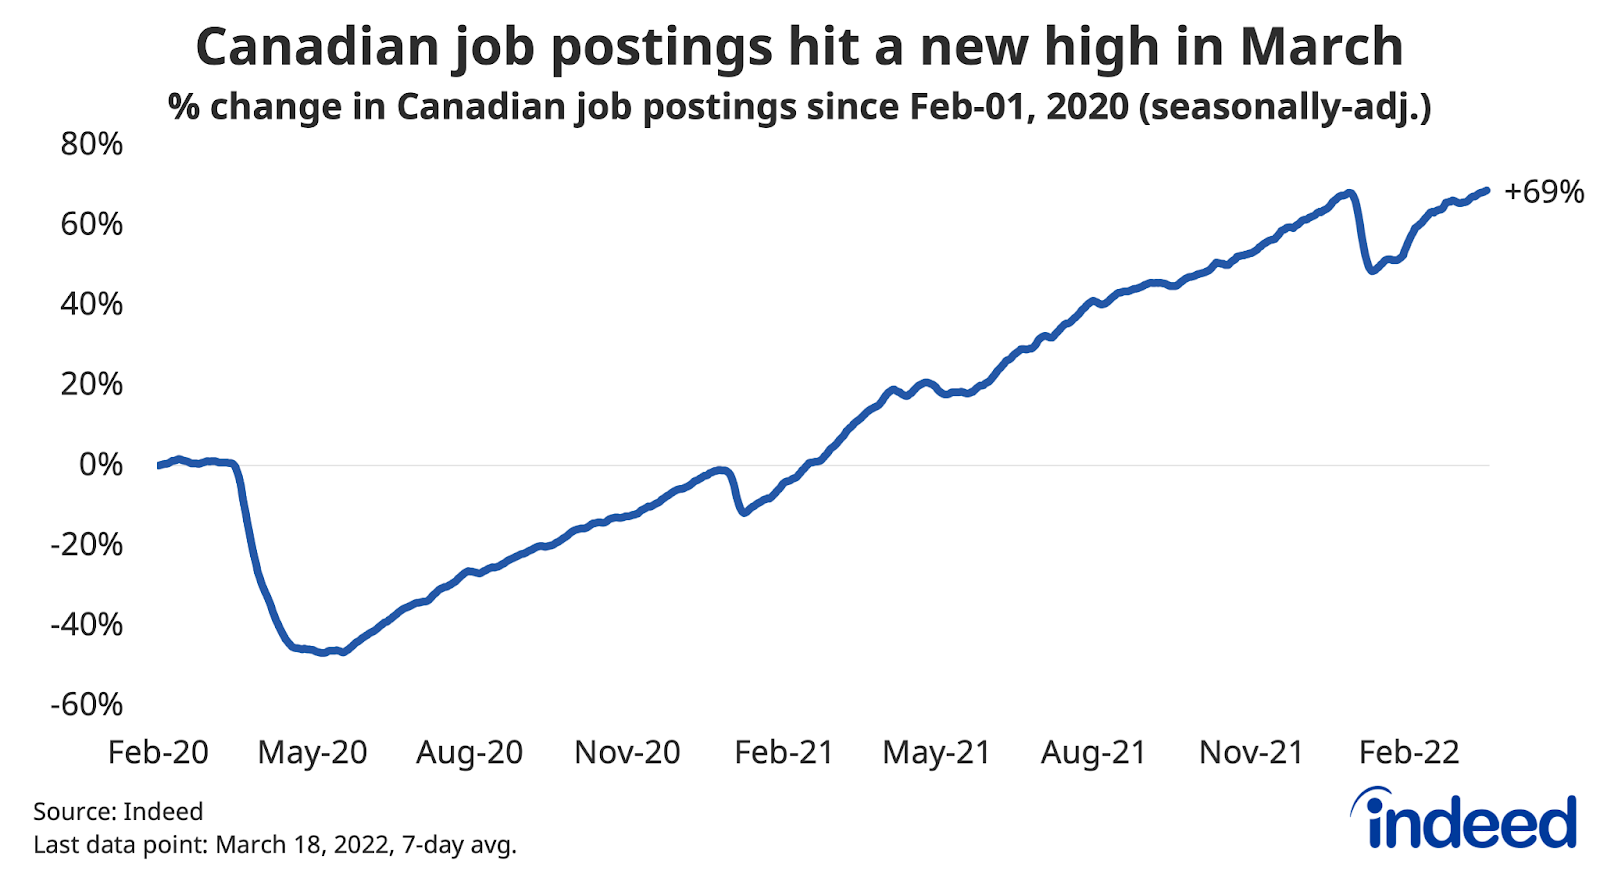 Line graph titled “Canadian job postings hit a new high in March.”